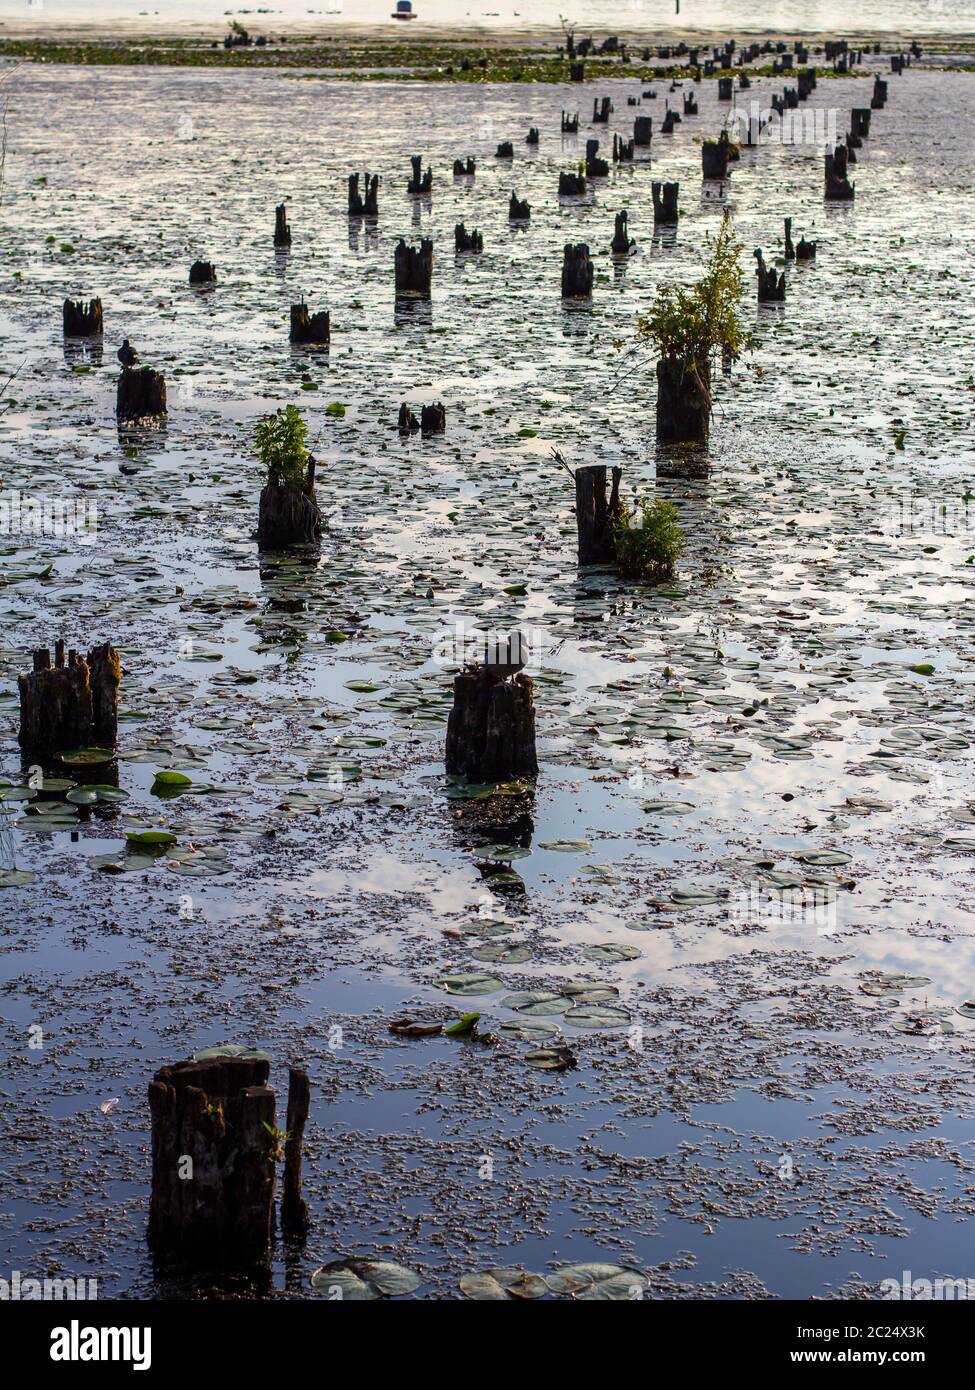 Old wood pilings in the water surrounded by plants Stock Photo